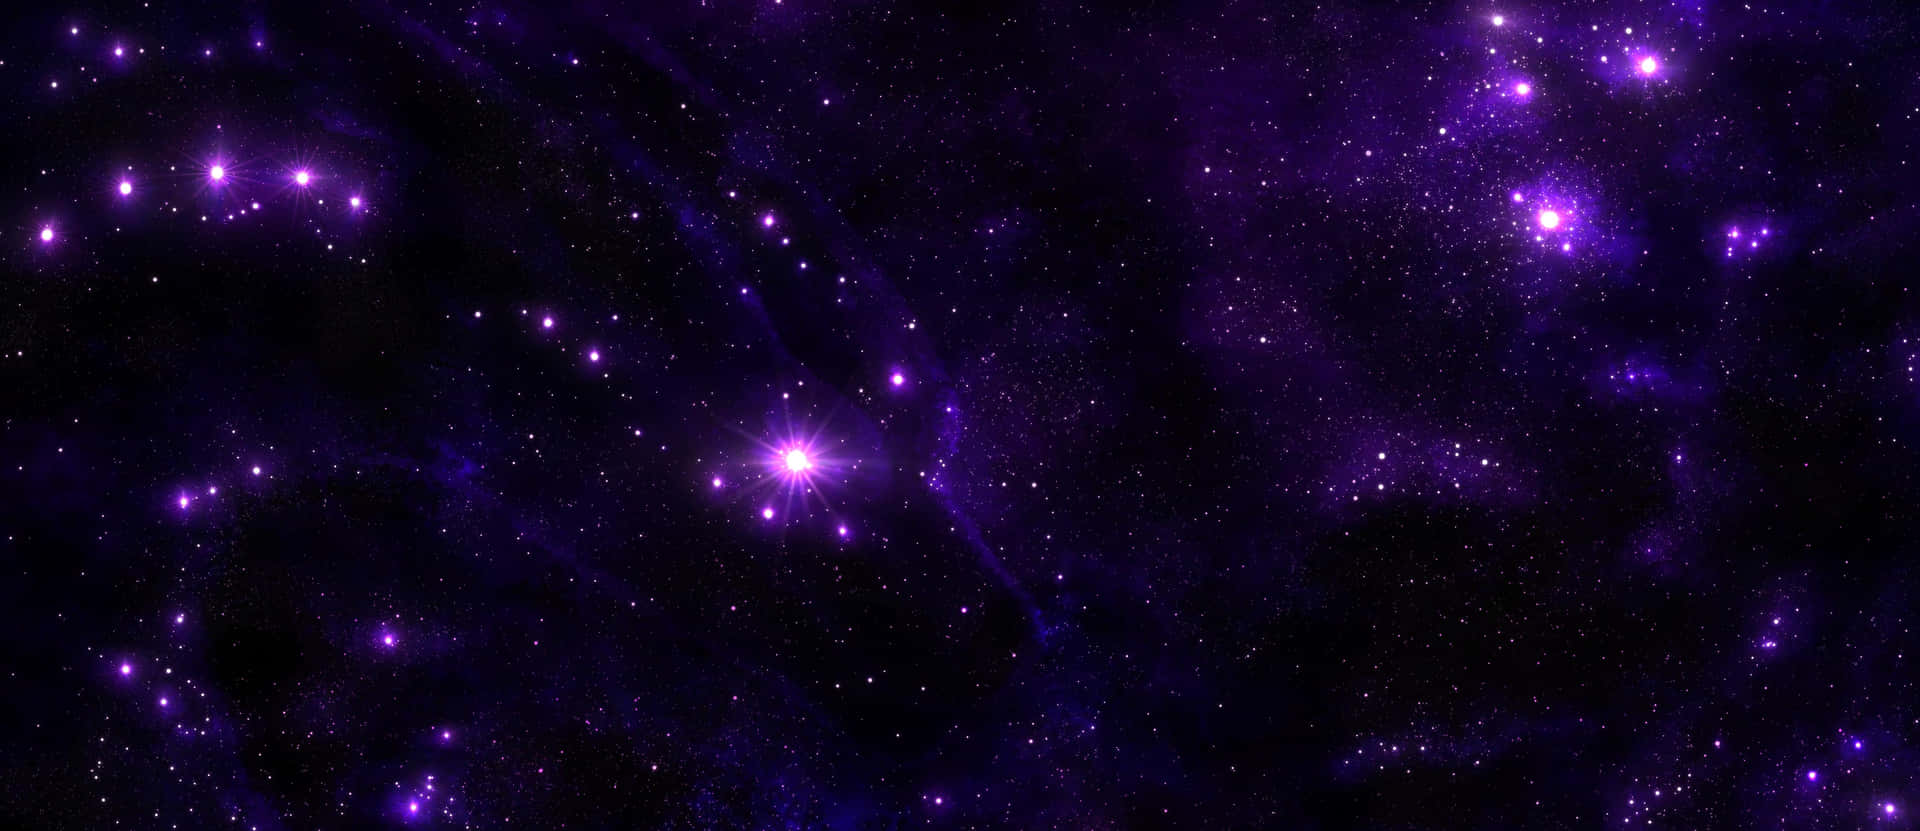 Download Purple Space Background 5145 X 2226 | Wallpapers.com